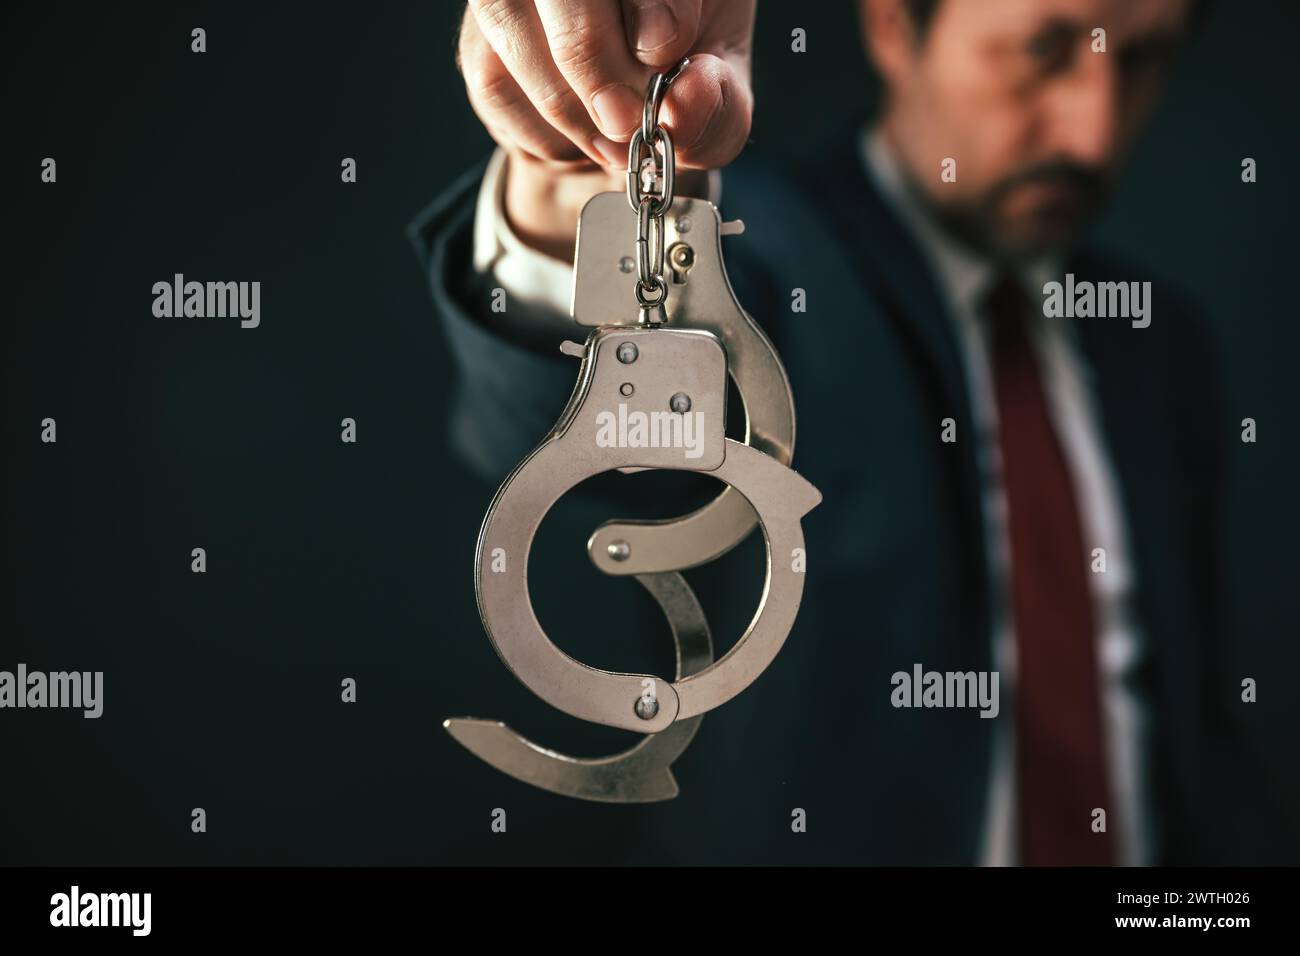 Police detective investigator holding handcuffs during criminal arrest, selective focus Stock Photo